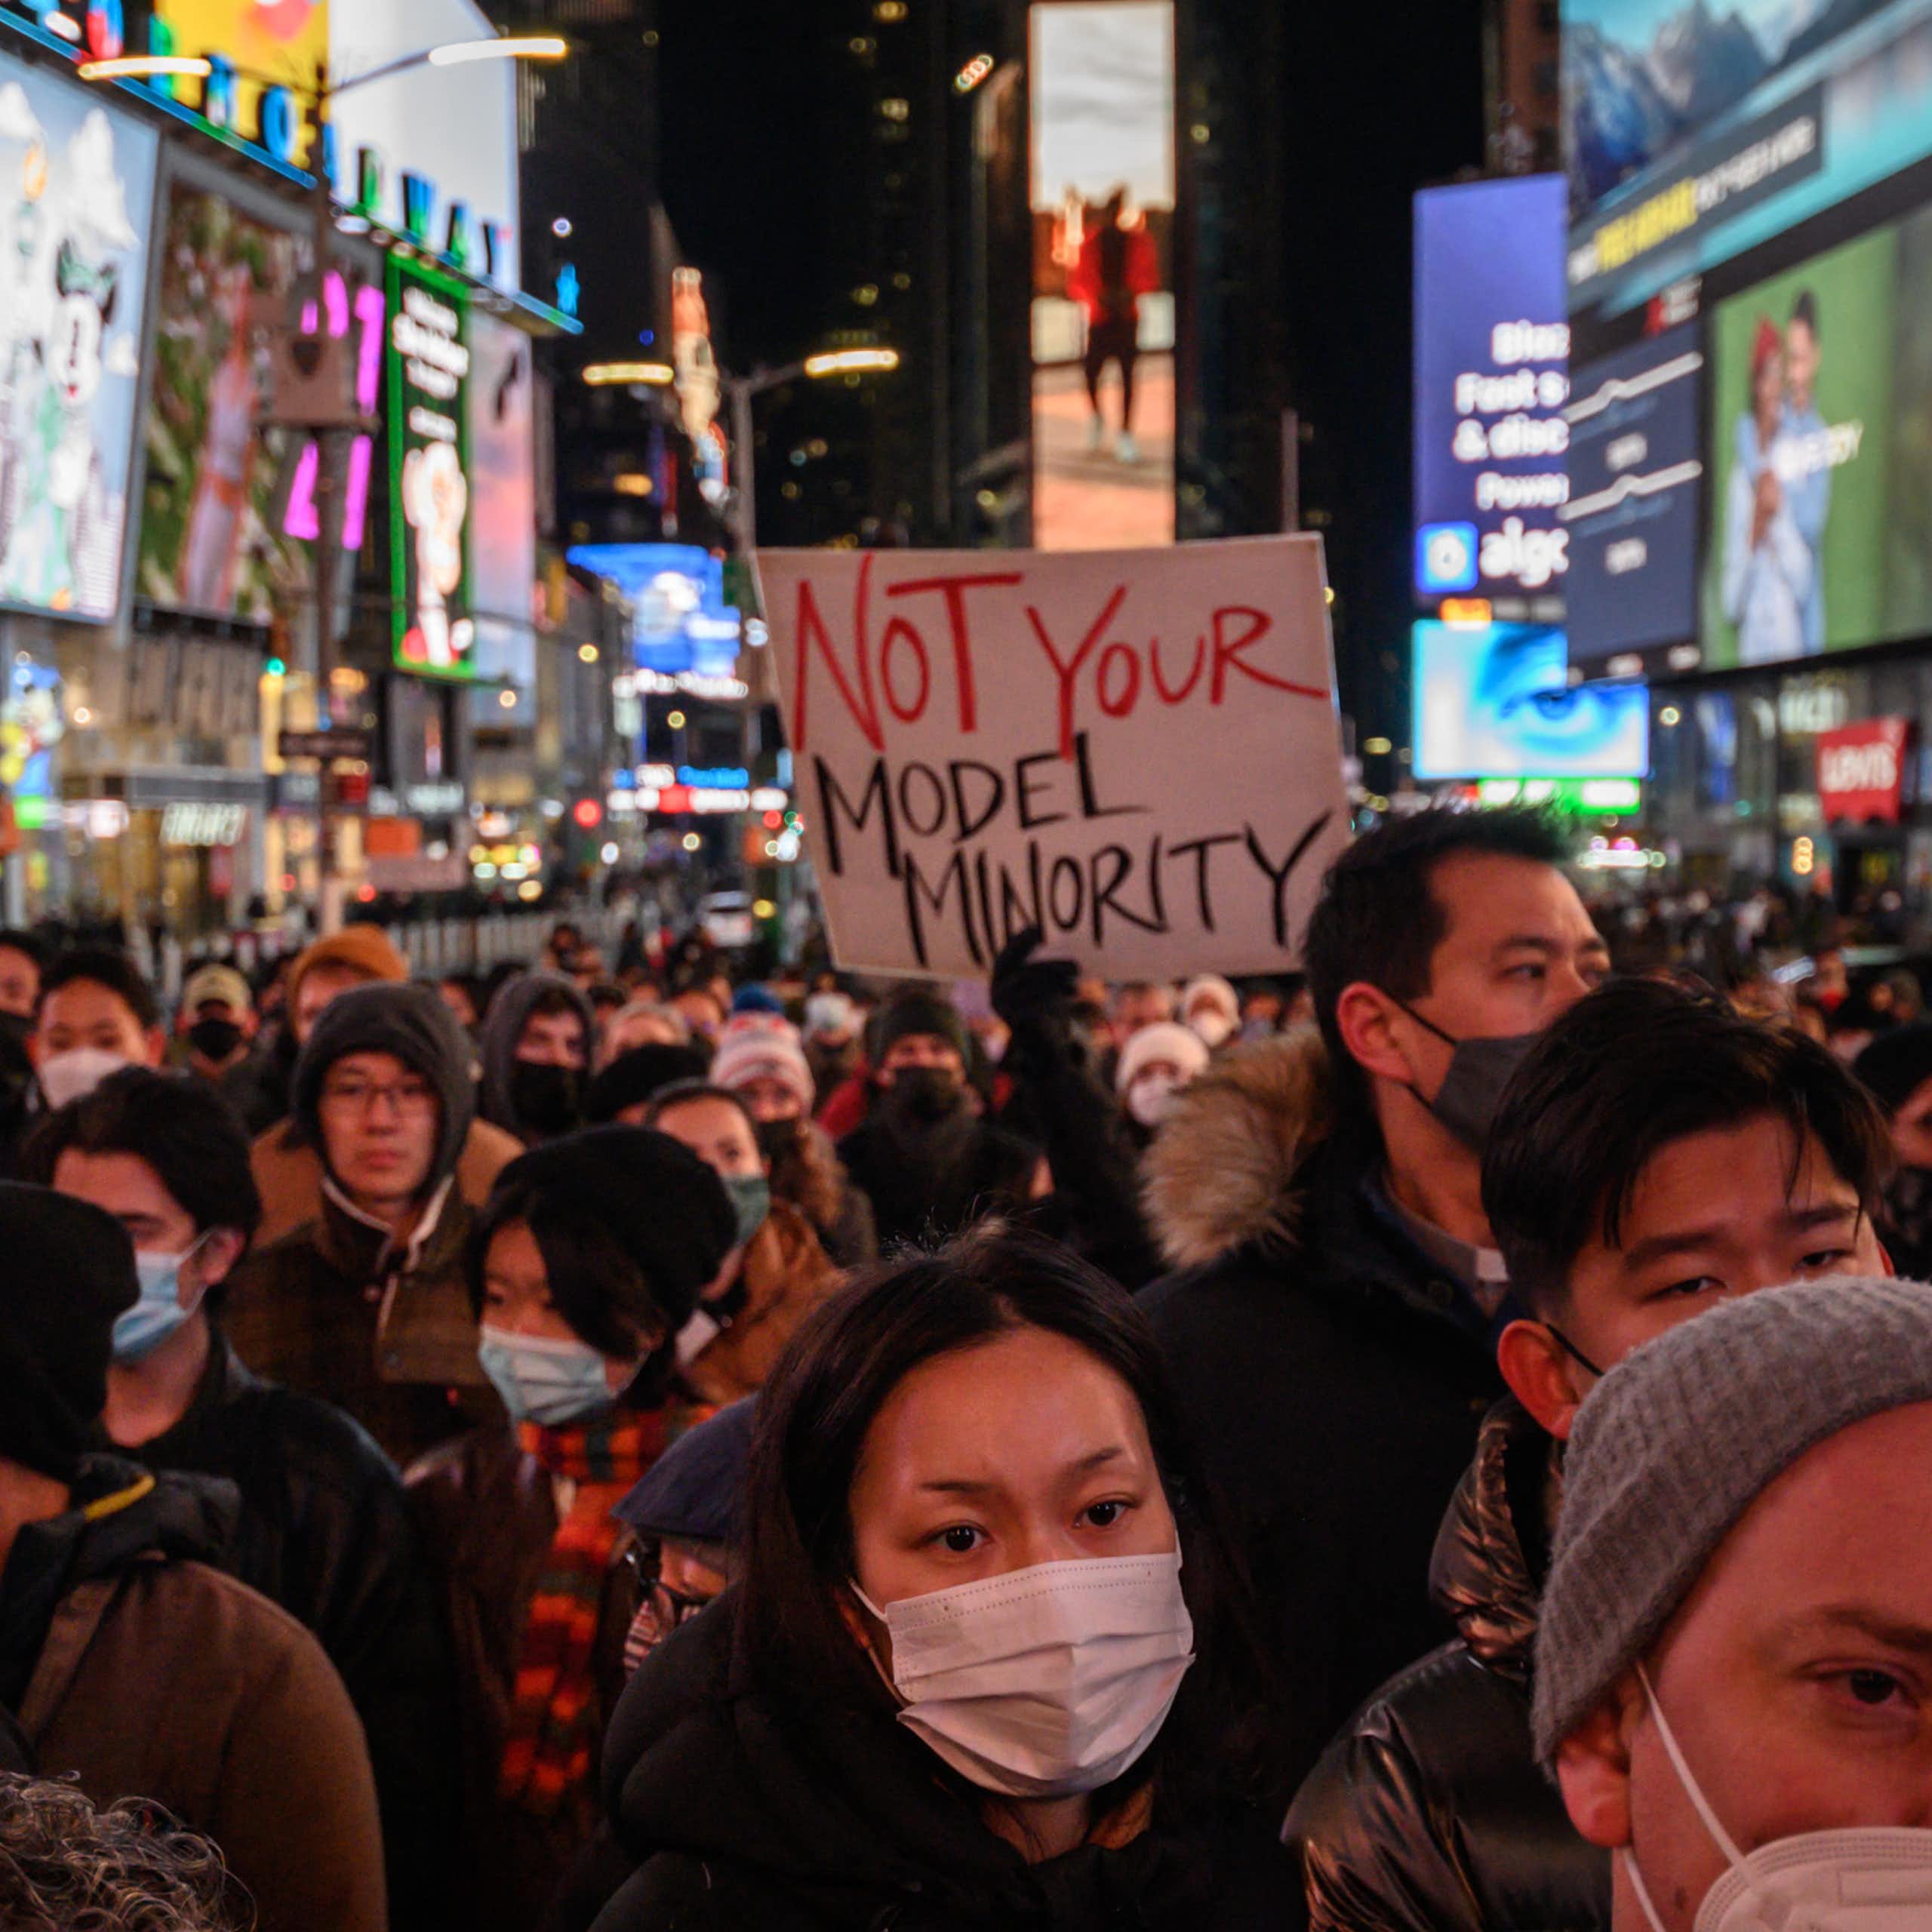 A person holds a "Not Your Model Minority" sign amid a large crowd in New York City's Times Square on Jan. 18, 2022.